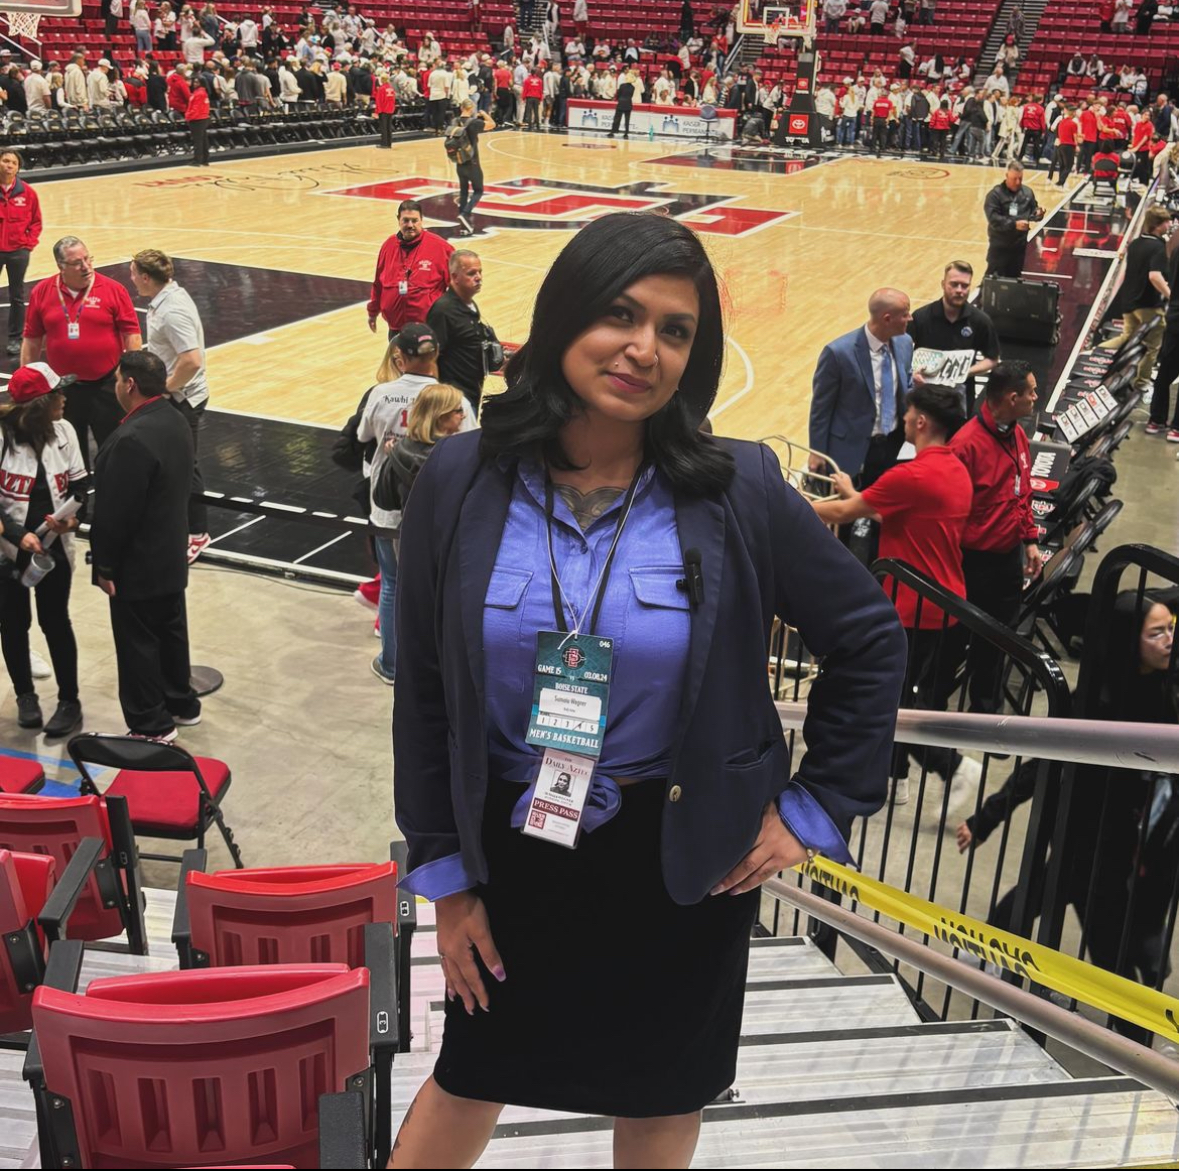 Sumaia Wegner poses for a photo at Viejas Arena after covering a game for the men’s basketball team. (Photo courtesy of Sumaia Wegner)
